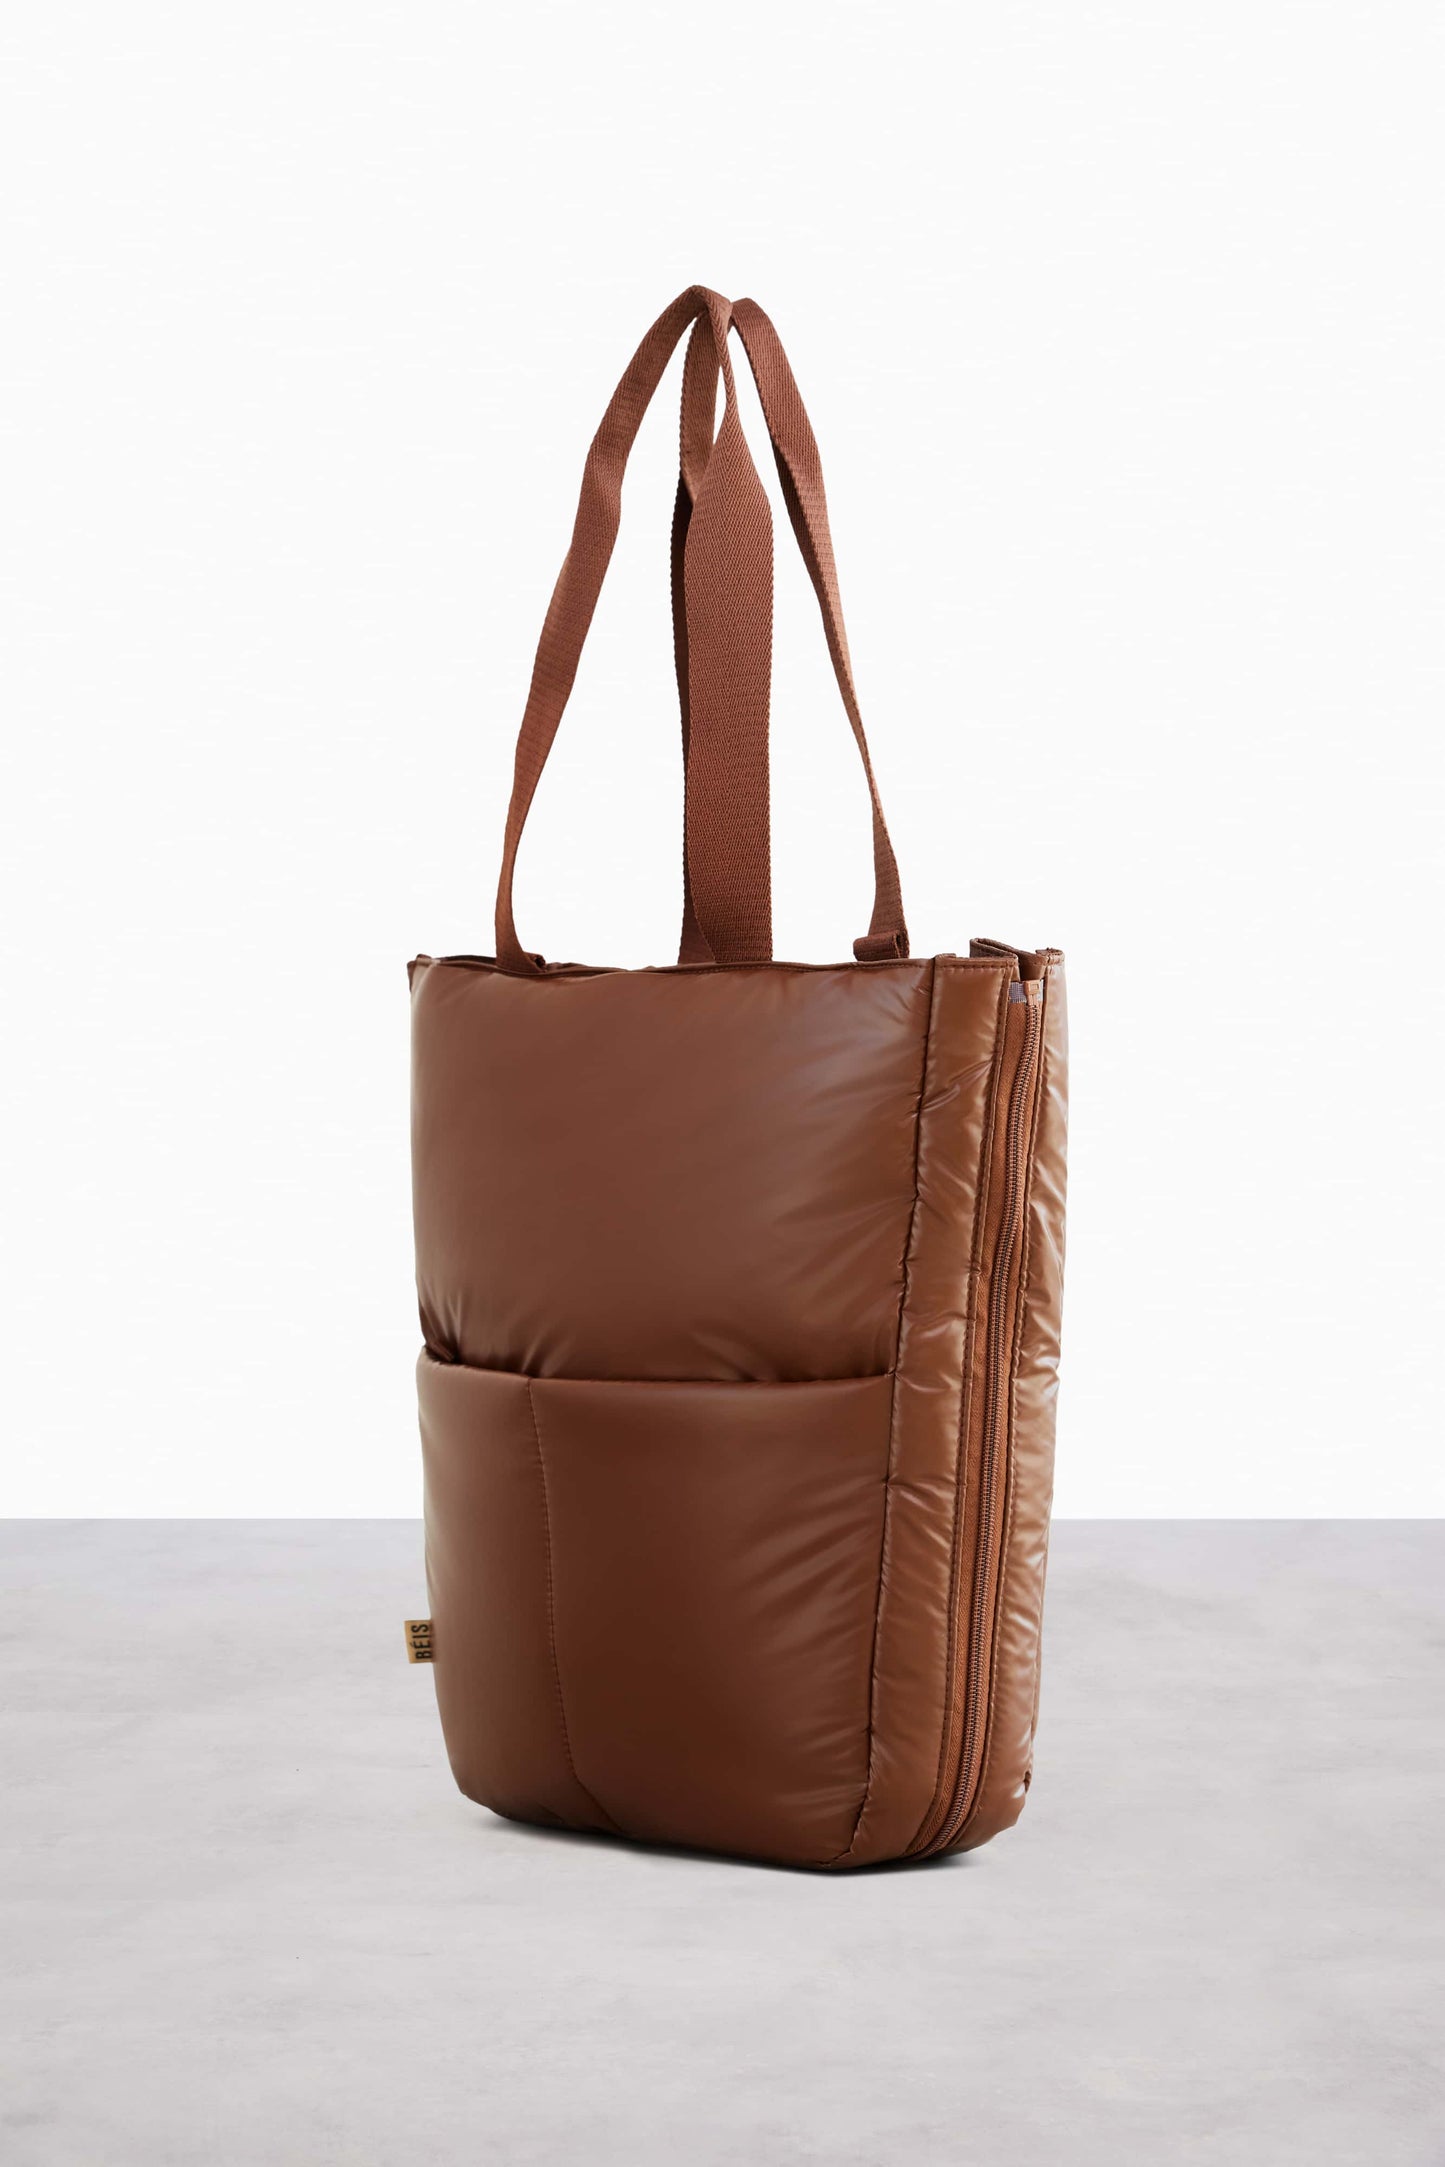 The Expandable Tote in Maple